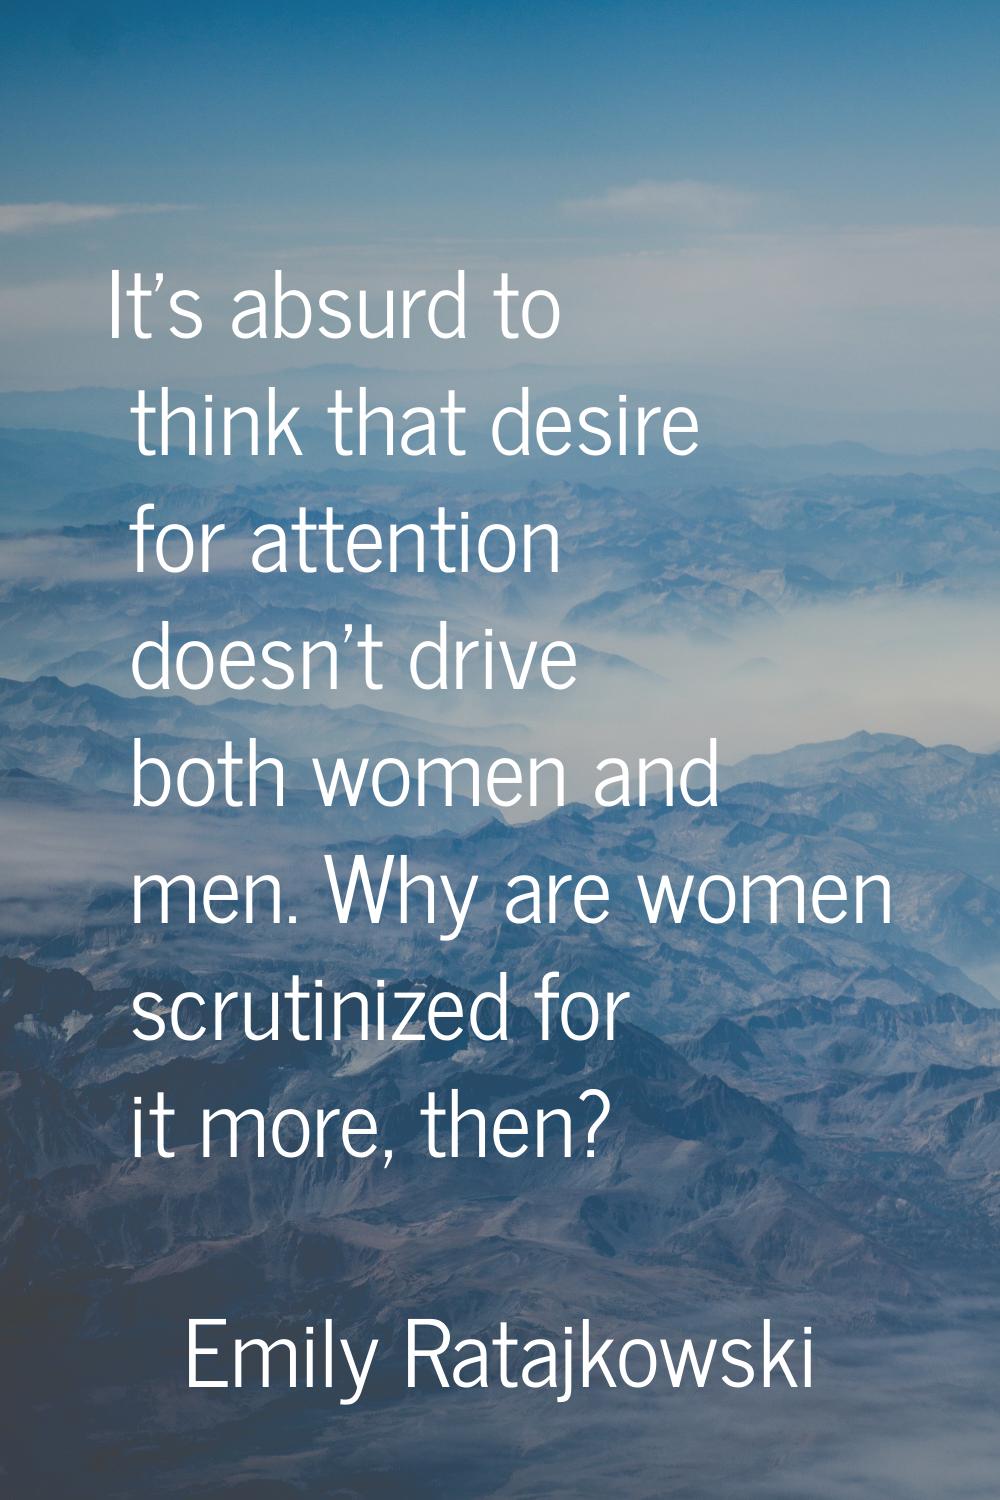 It's absurd to think that desire for attention doesn't drive both women and men. Why are women scru